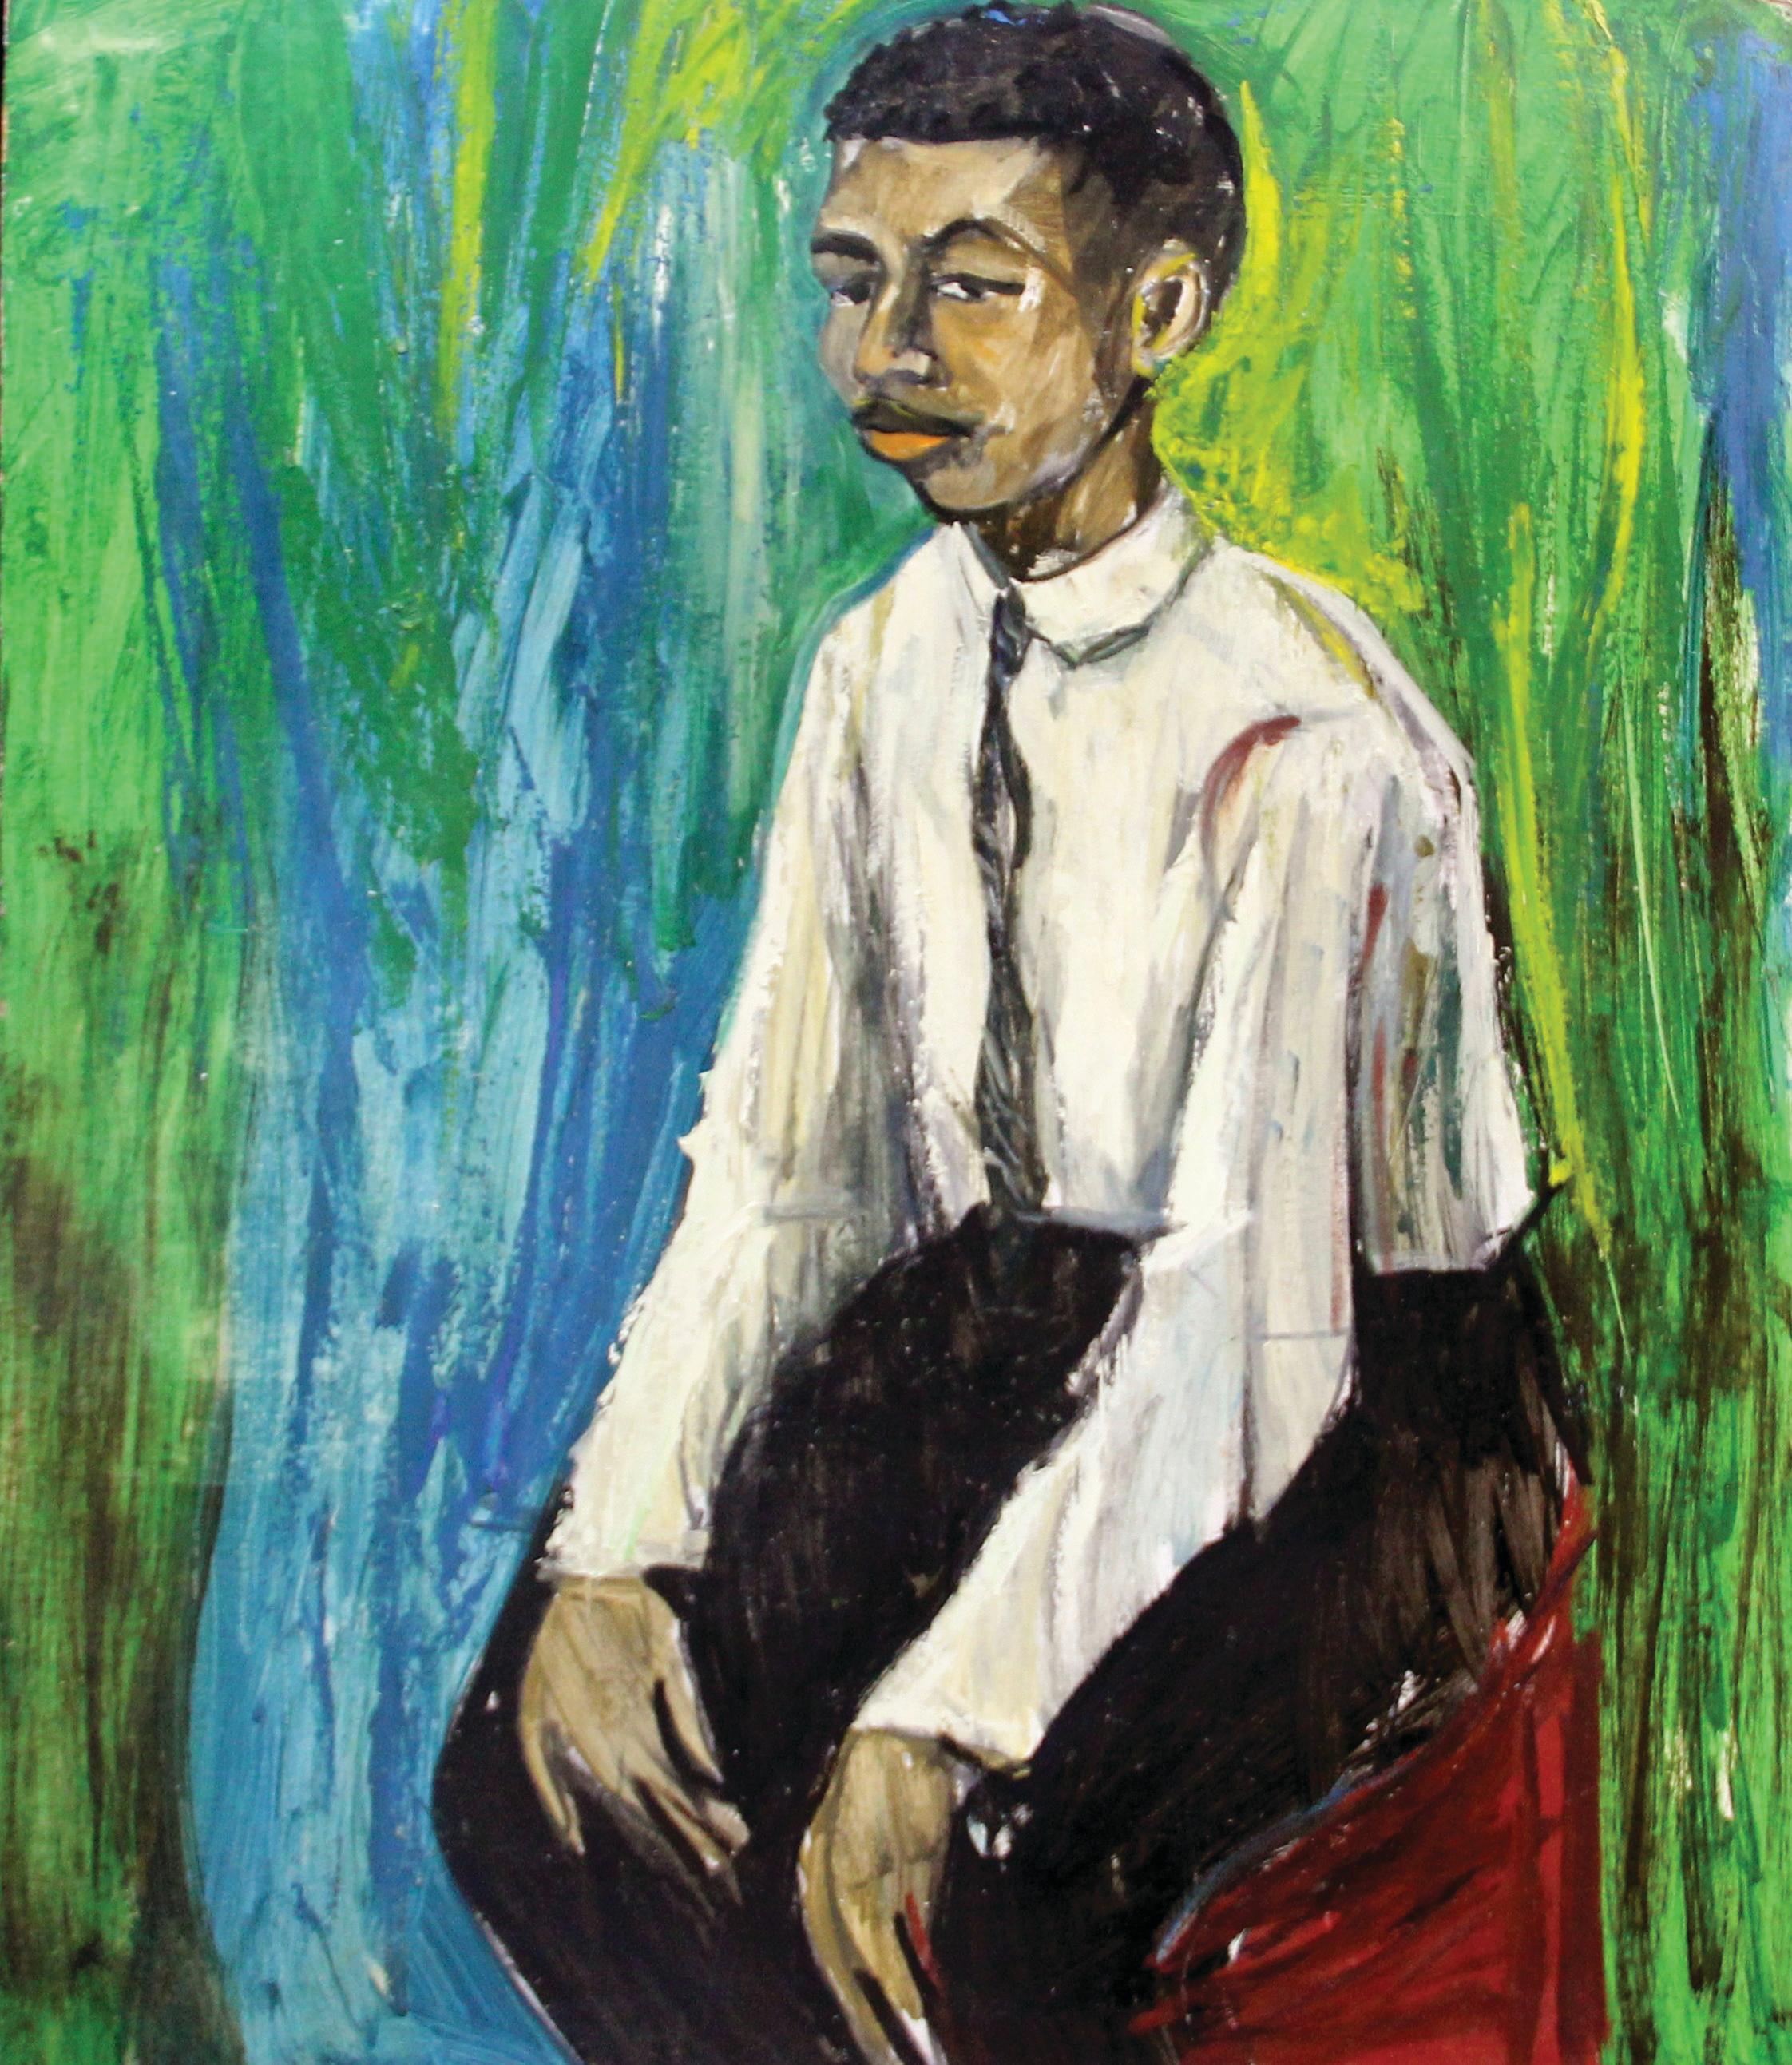 Boy Waiting, Portrait of a Young Man by Philadelphia Artist